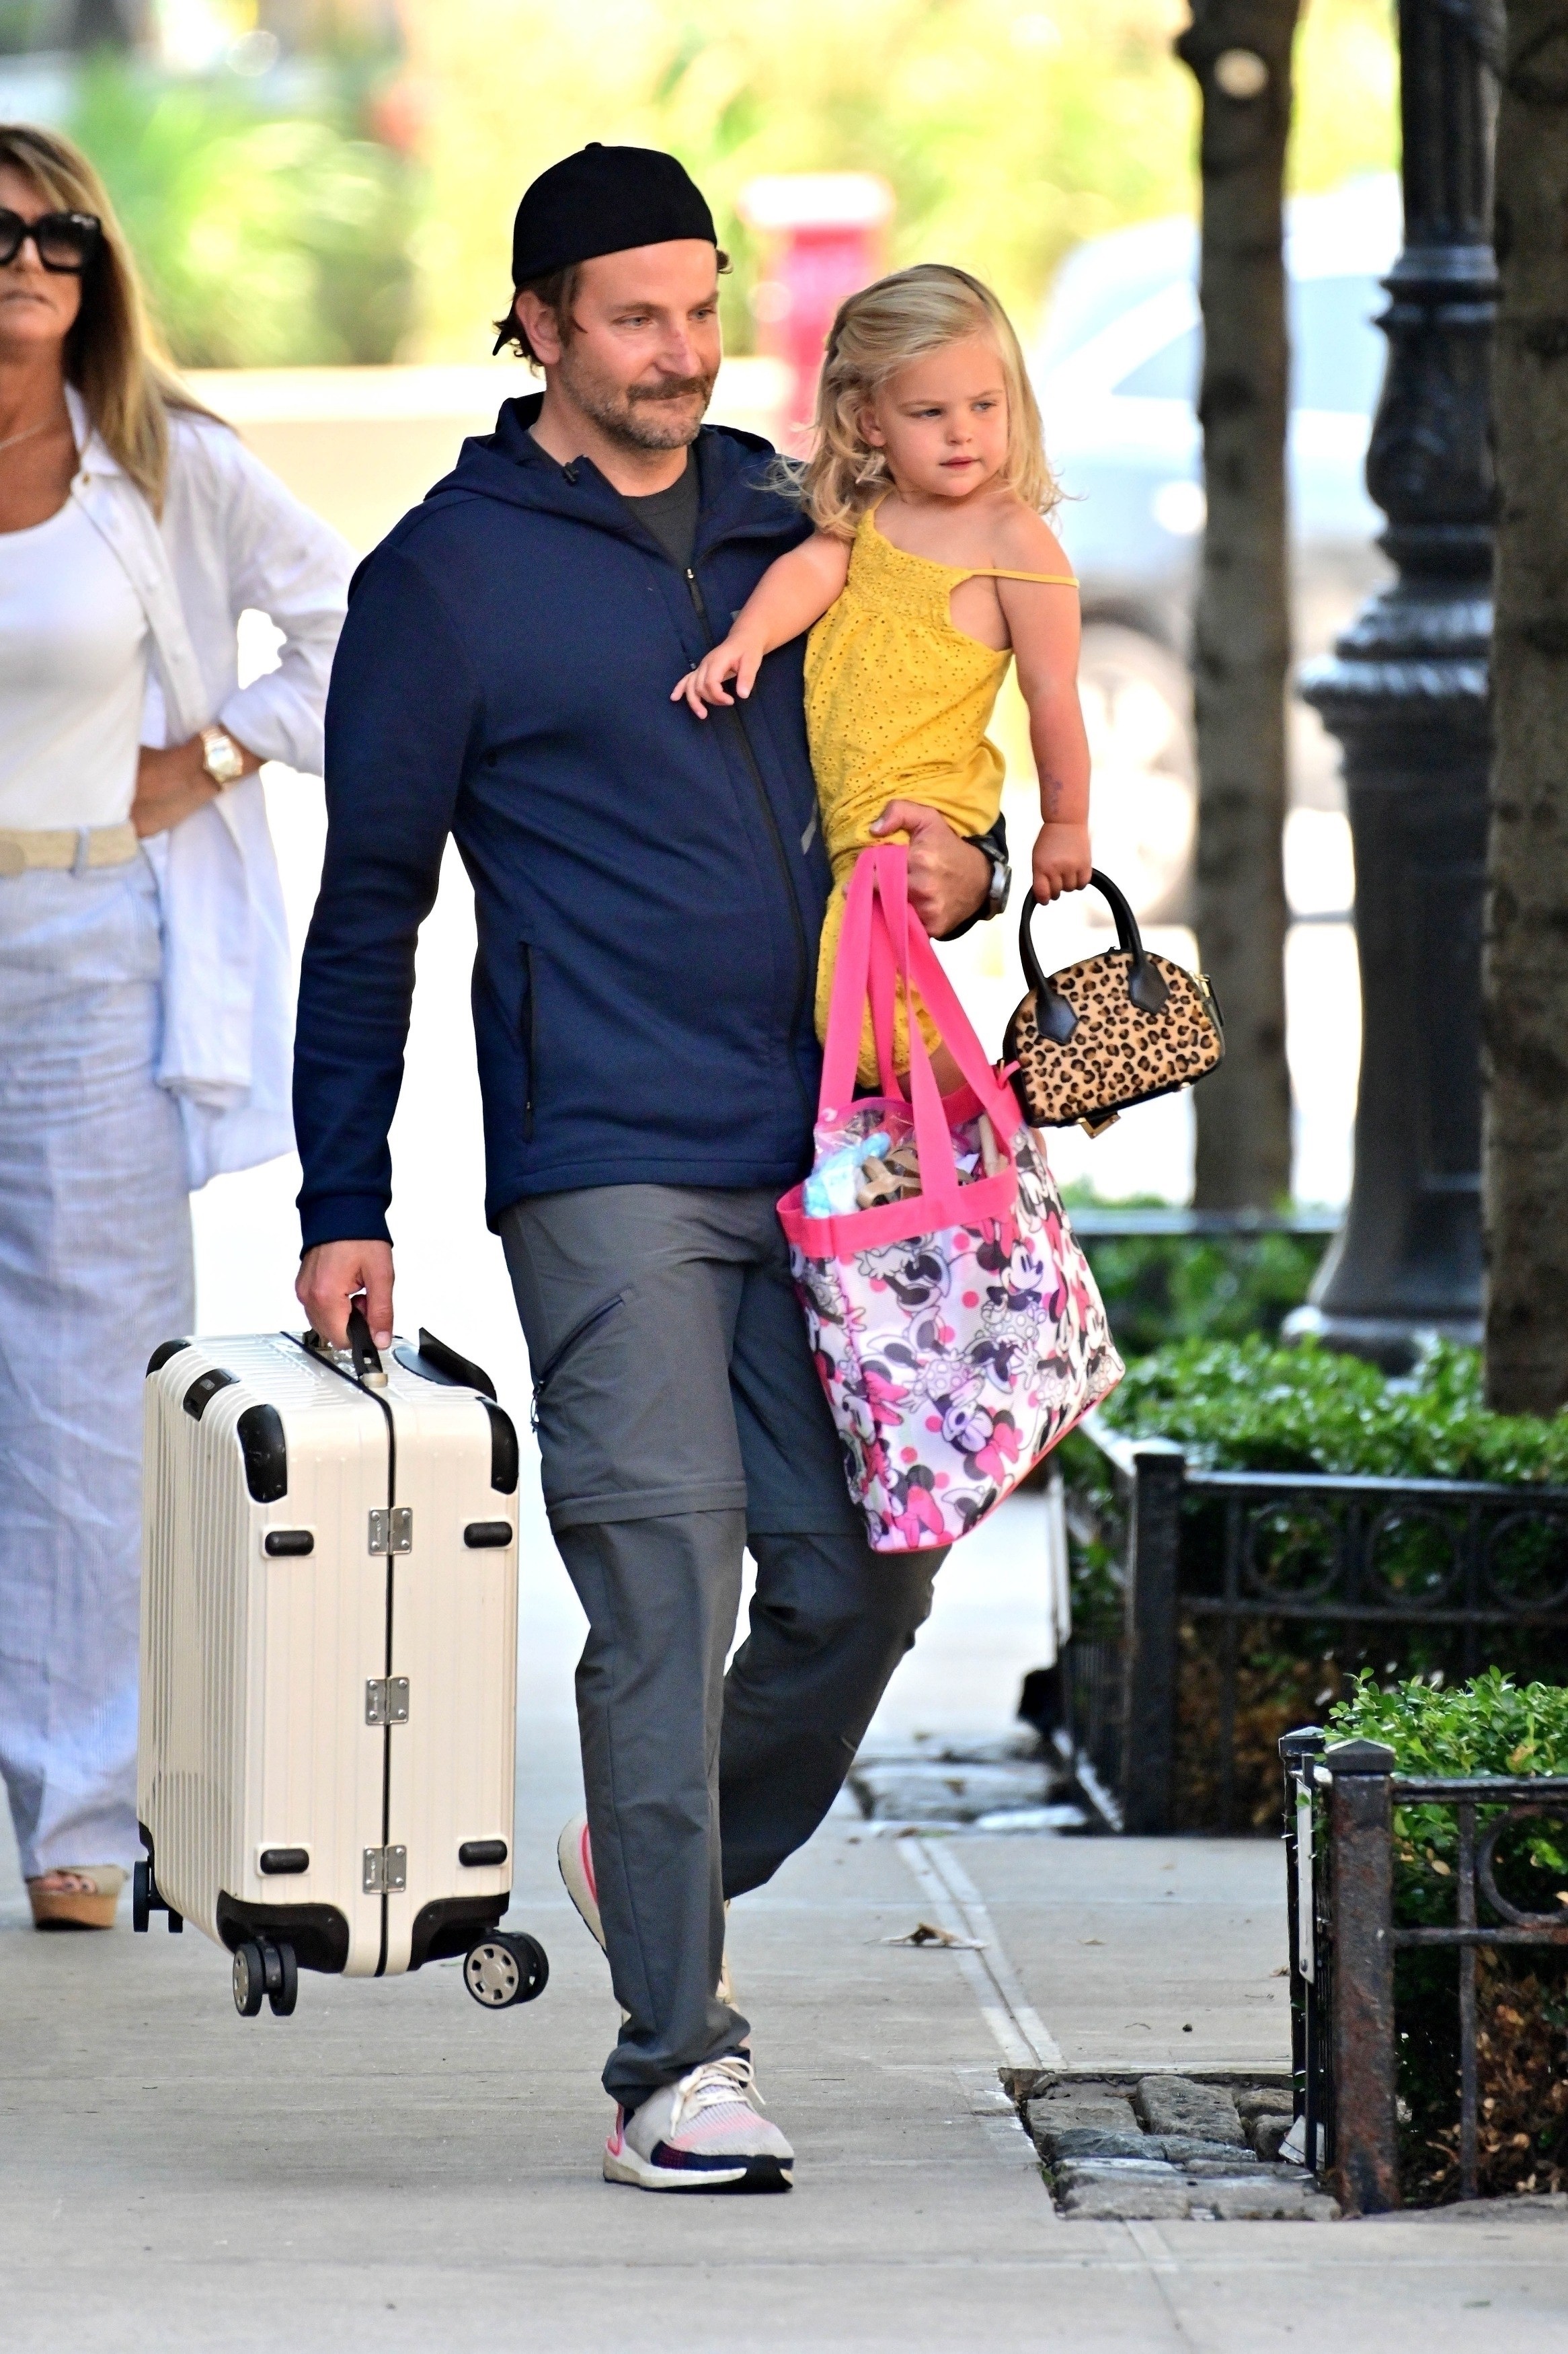 New York, NY  - *EXCLUSIVE* - It’s been a month and some change since model Irina Shayk and actor Bradley Cooper broke up. The two have agreed to share custody of their 2-year-old daughter, Lea De Seine Shayk Cooper, and things seem to be running smoothly (Foto: BACKGRID)